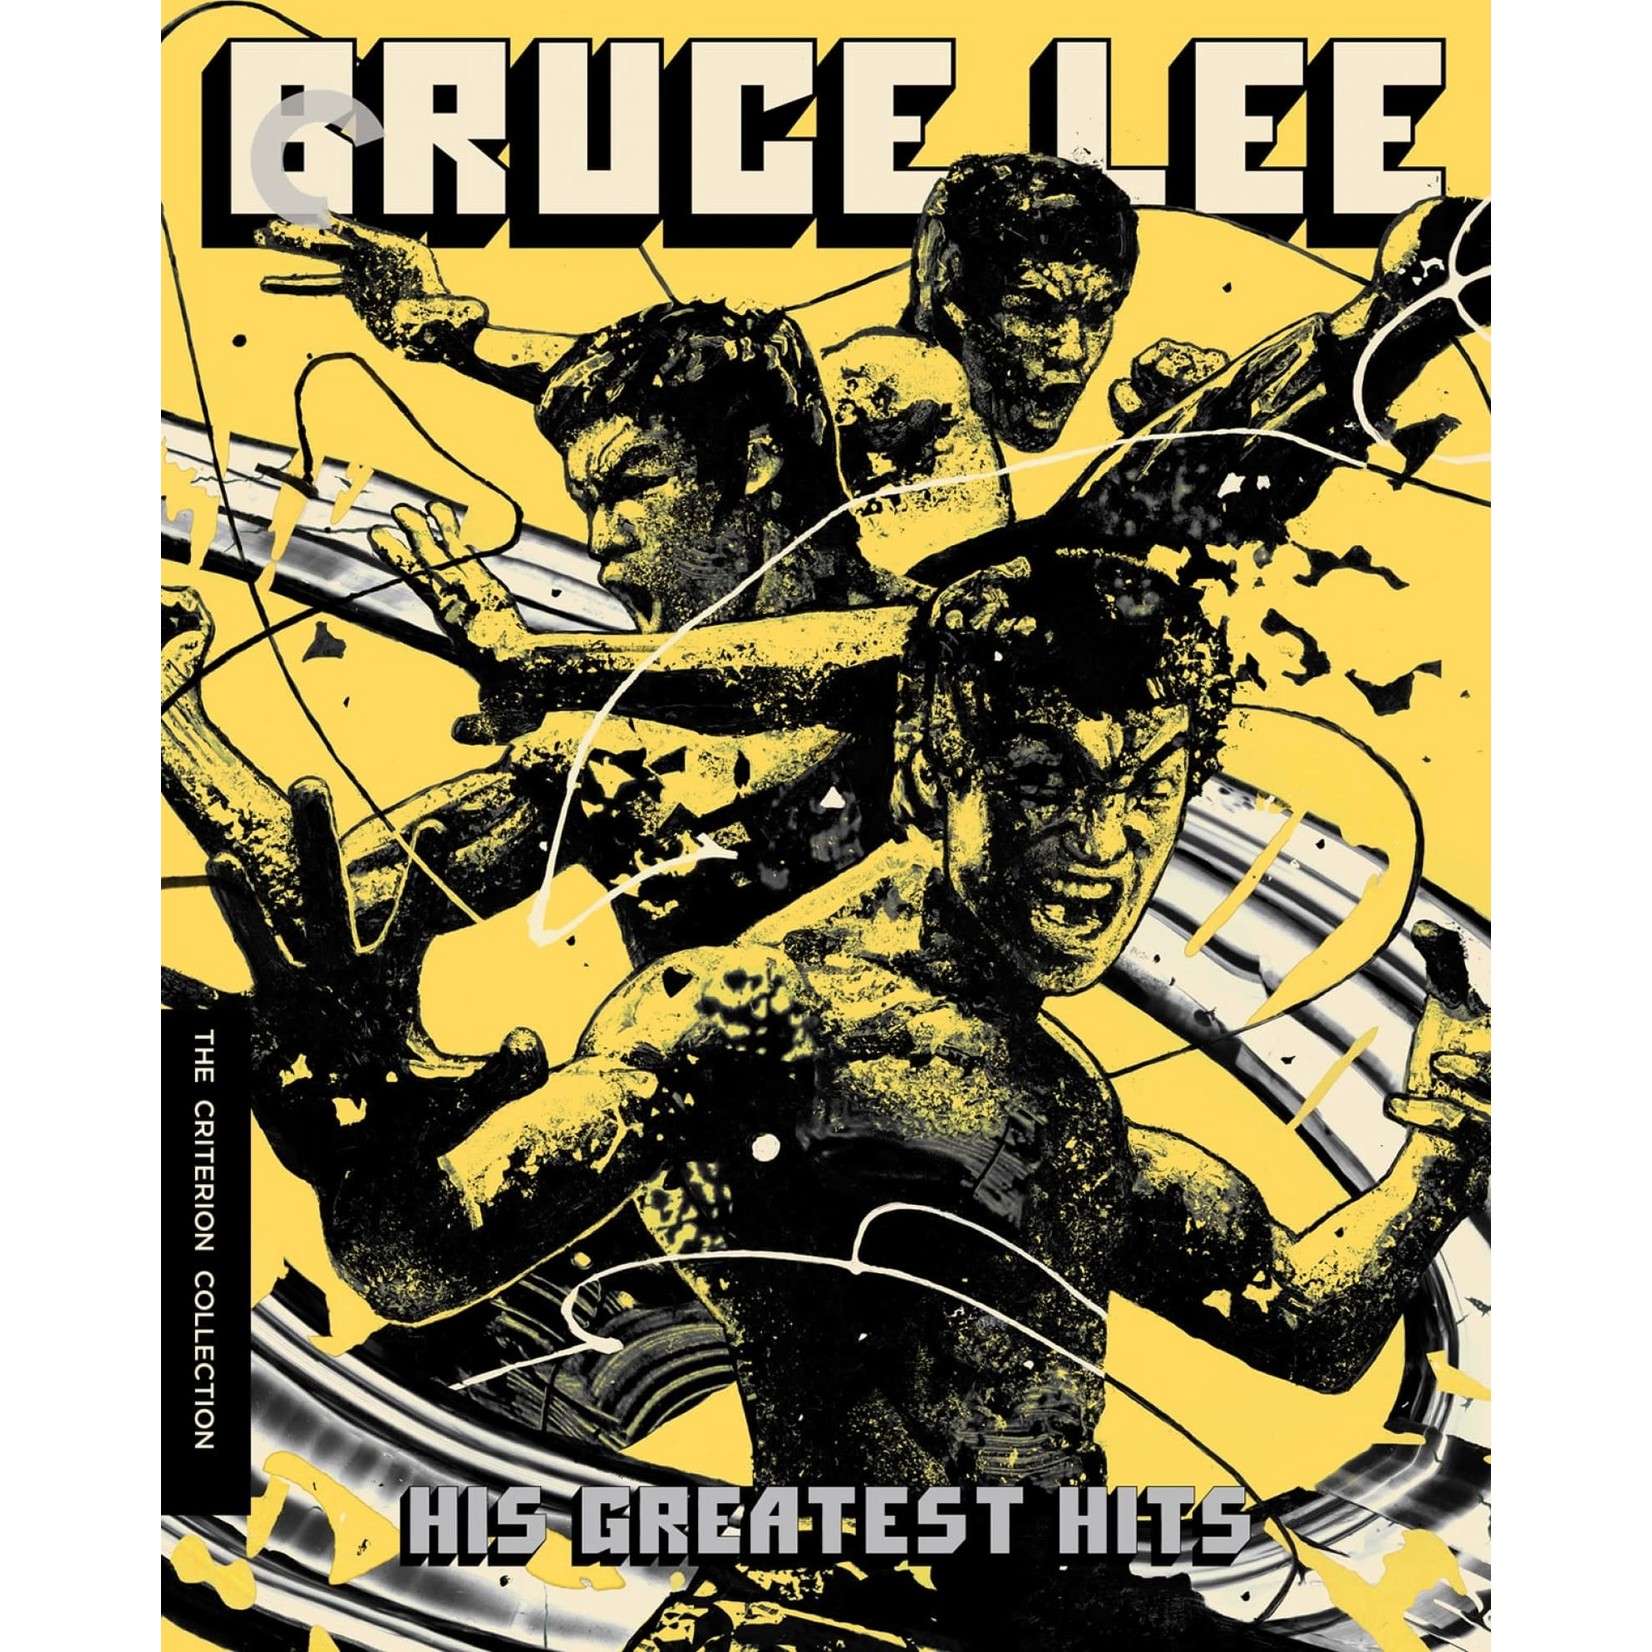 Criterion Collection Bruce Lee - His Greatest Hits: The Big Boss / Fist of Fury / The Way of the Dragon / Enter the Dragon / Game of Death (7BD)